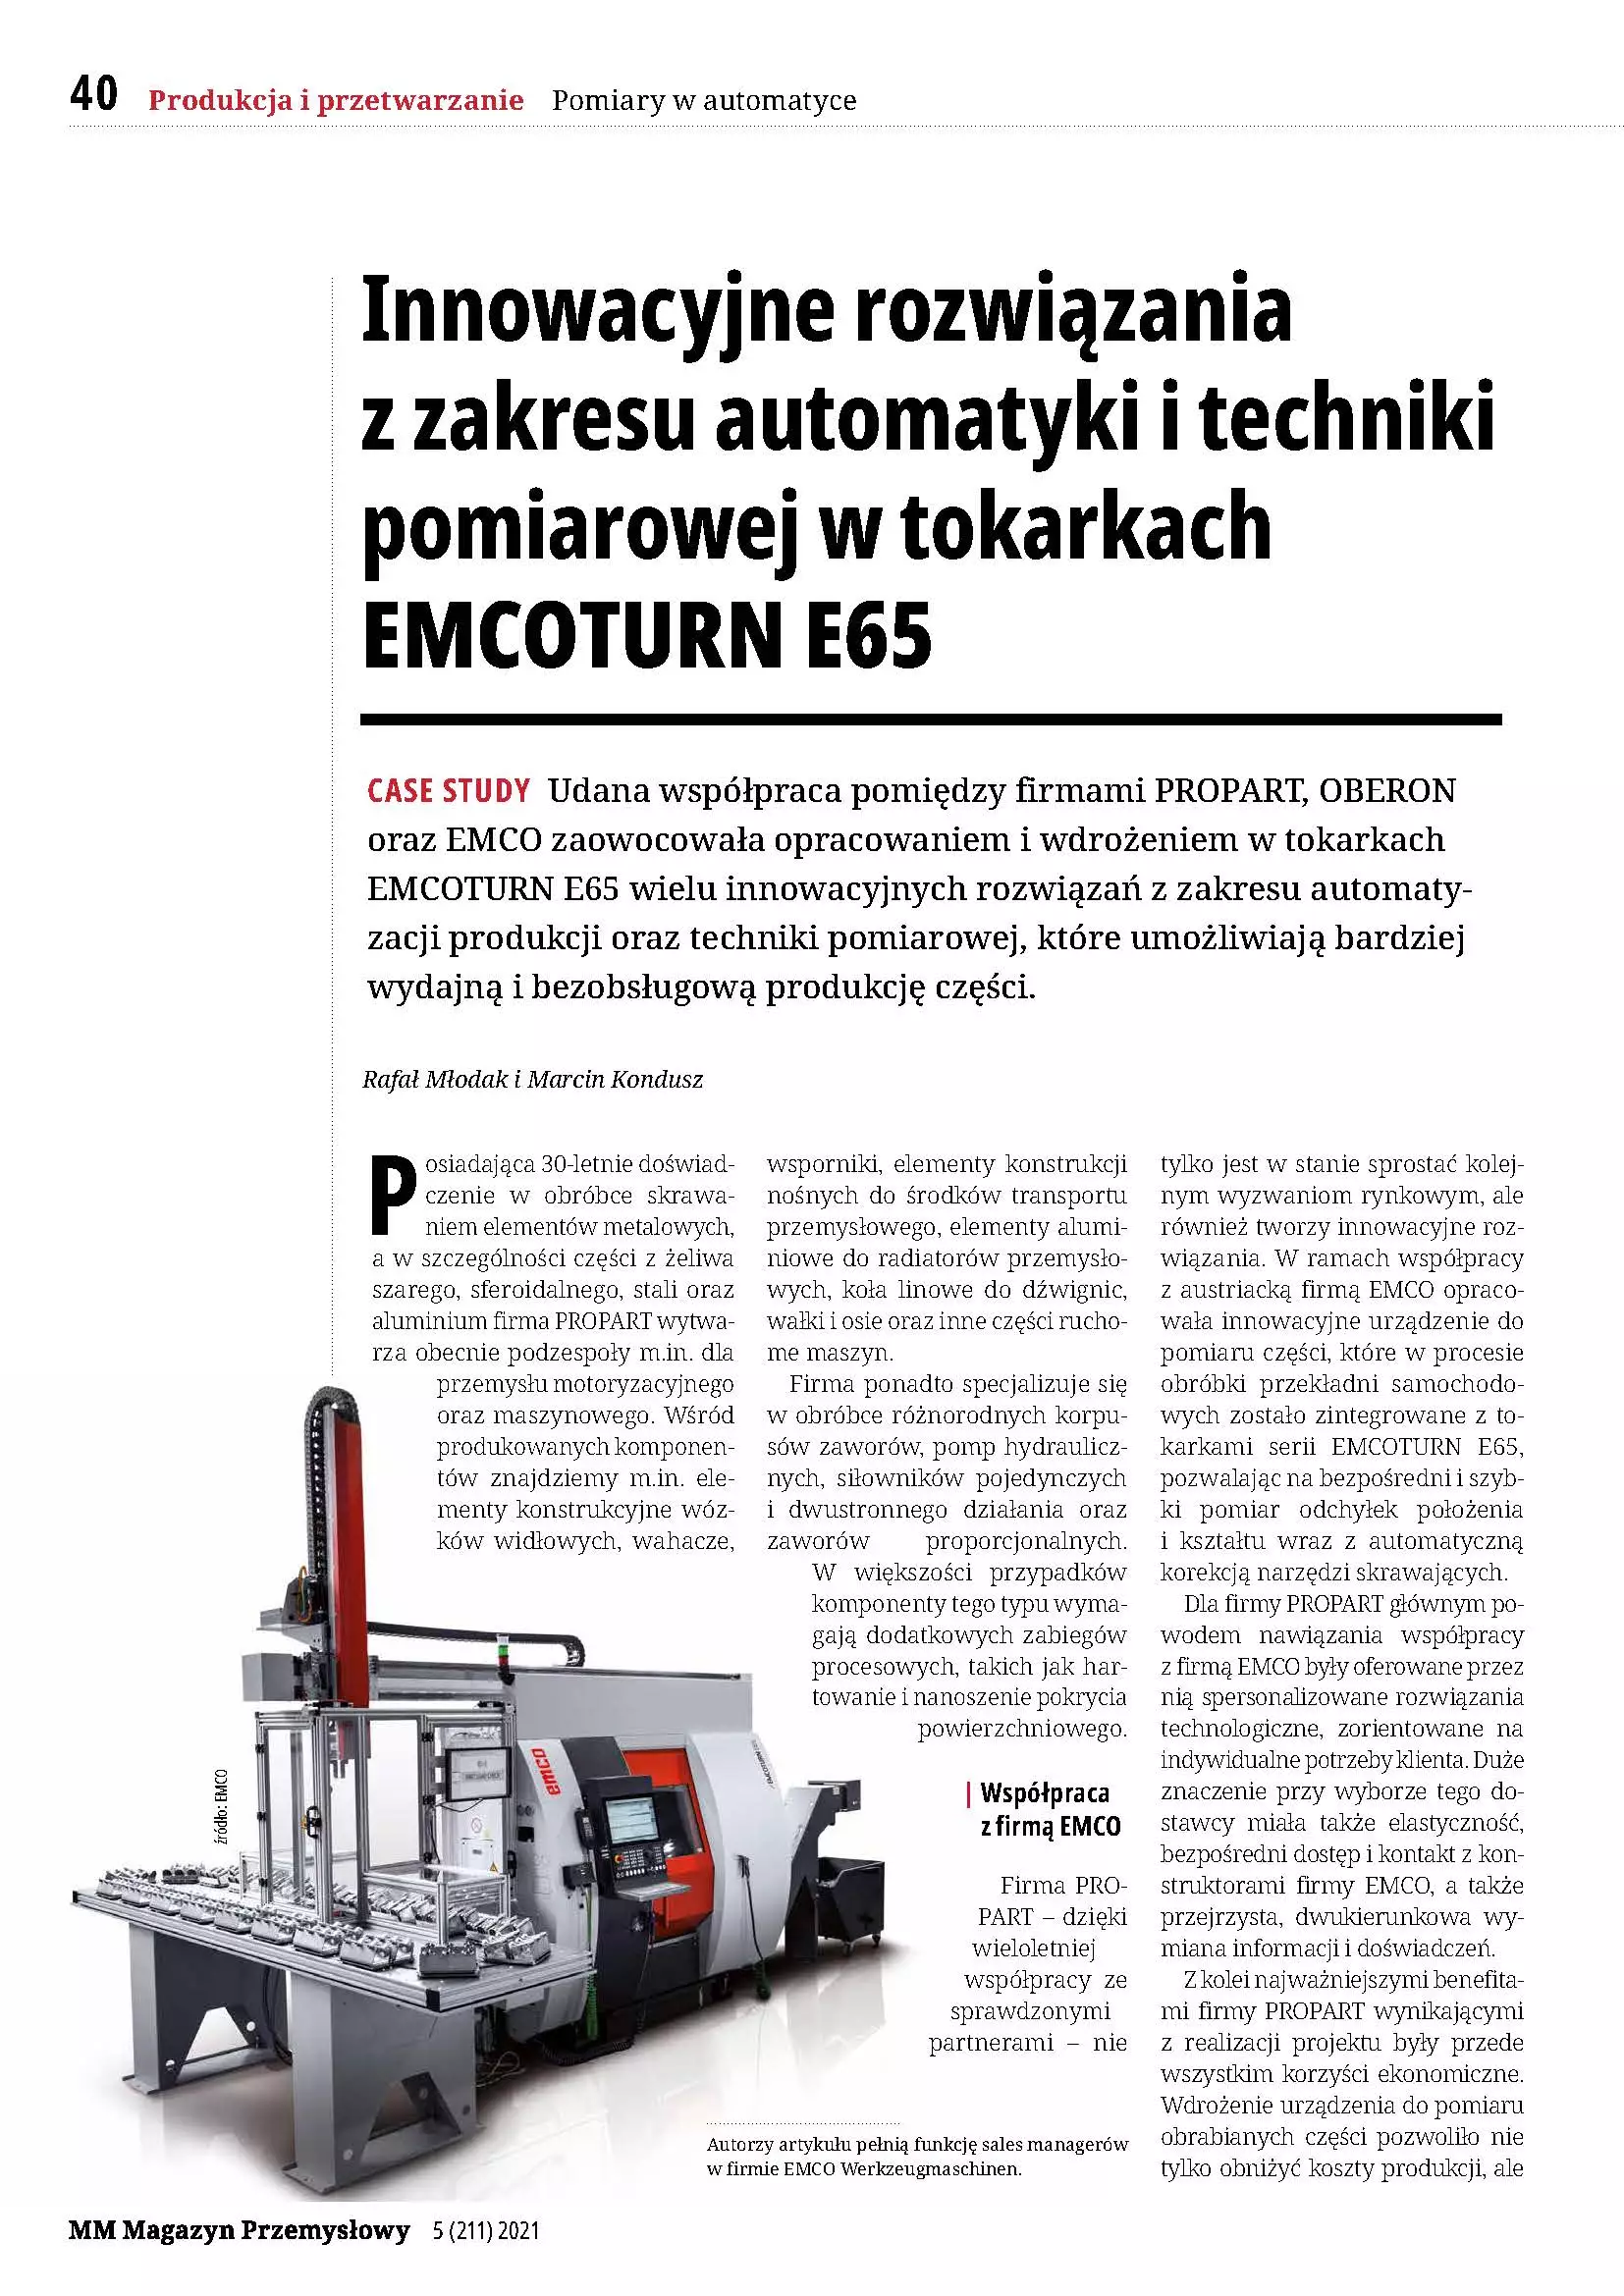 Industry press about PROPART